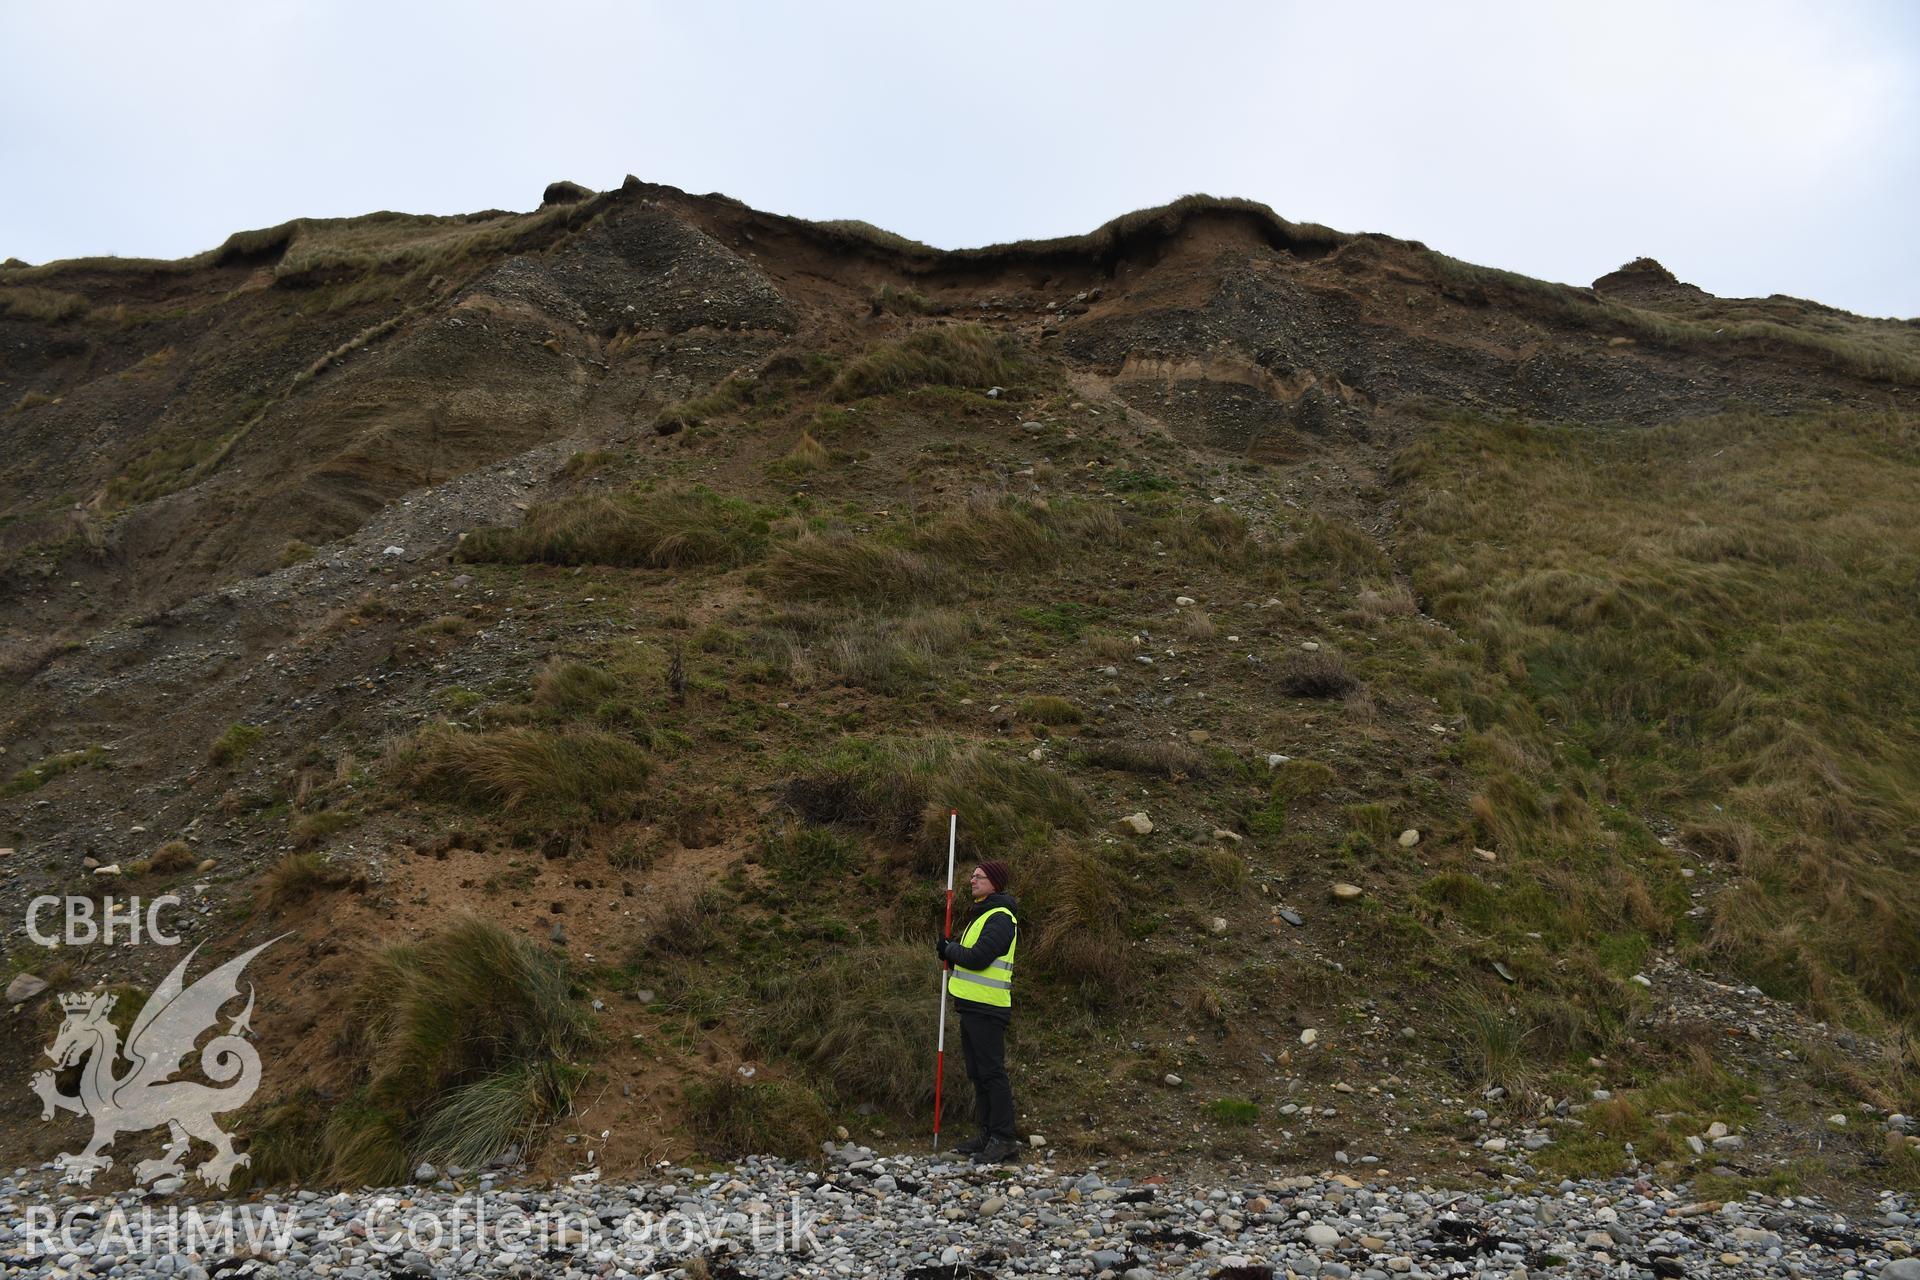 Movement of sediments and stabilisation of turf on eroding cliff face. Taken by Hannah Genders Boyd. Produced with EU funds through the Ireland Wales Co-operation Programme 2014-2023. All material made freely available through the Open Government Licence.